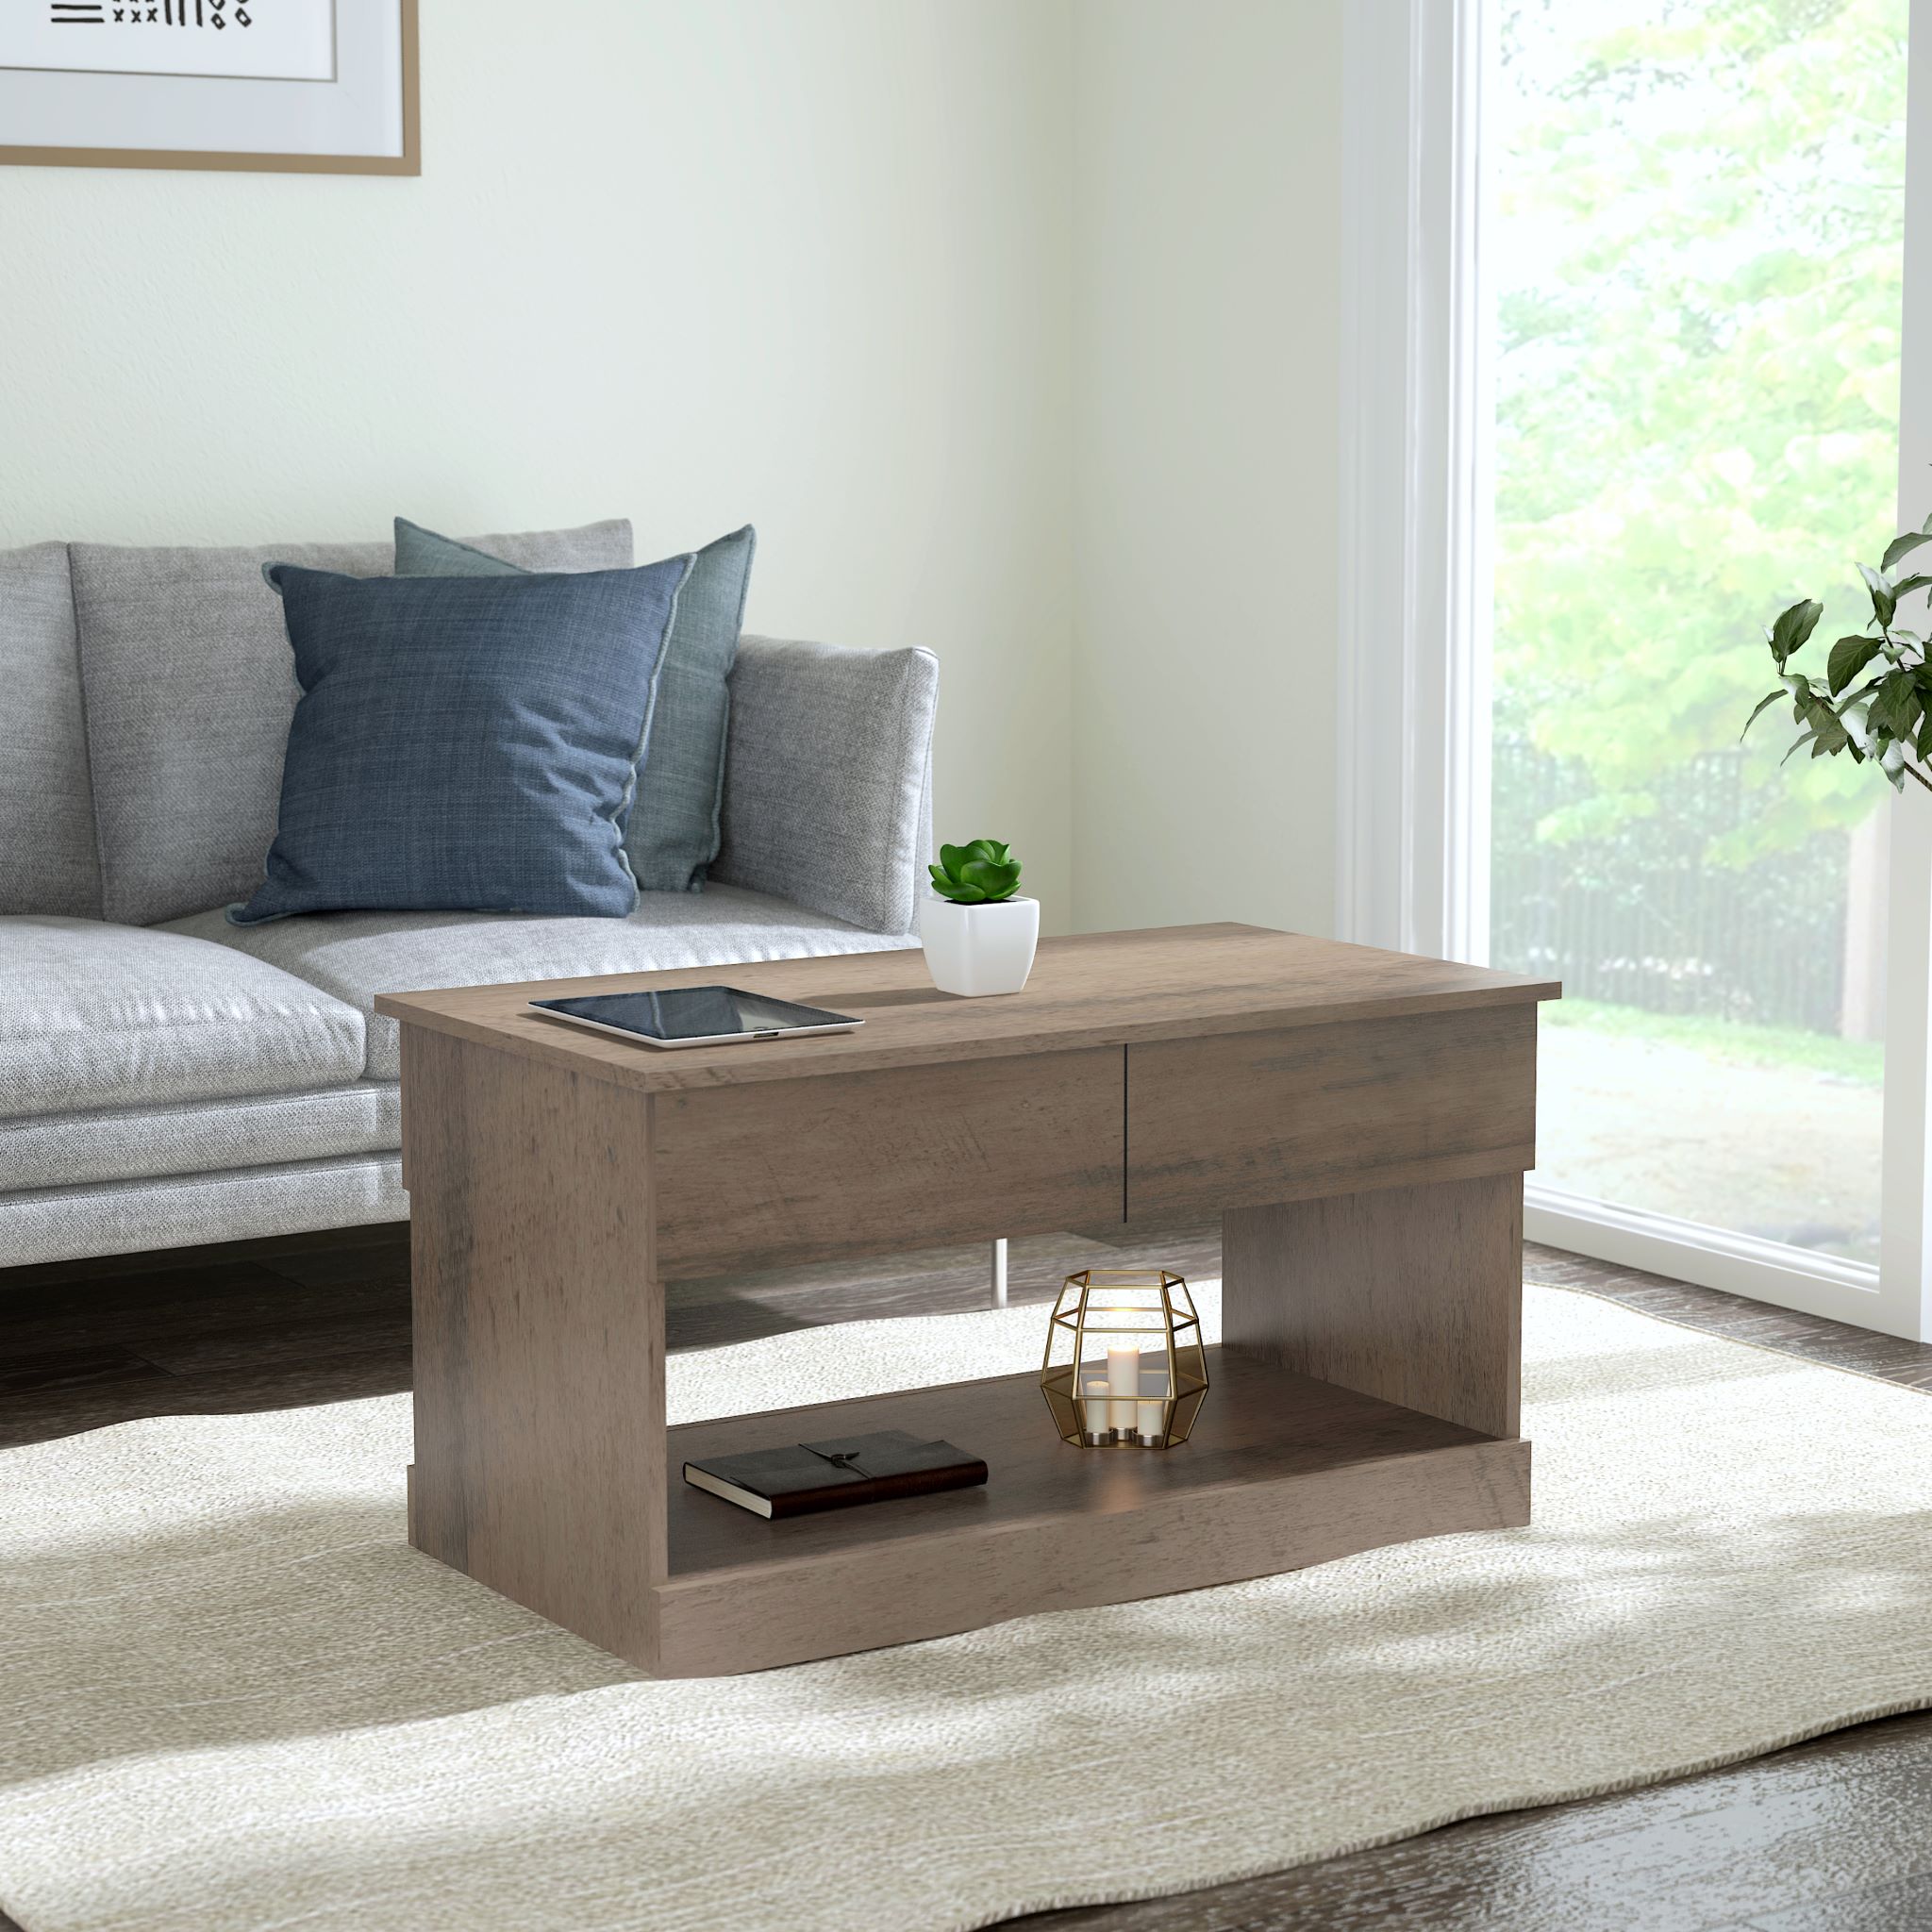 Brindle Rectangular Lift Top Coffee Table, Gray Oak, by Hillsdale Living Essentials - image 2 of 22